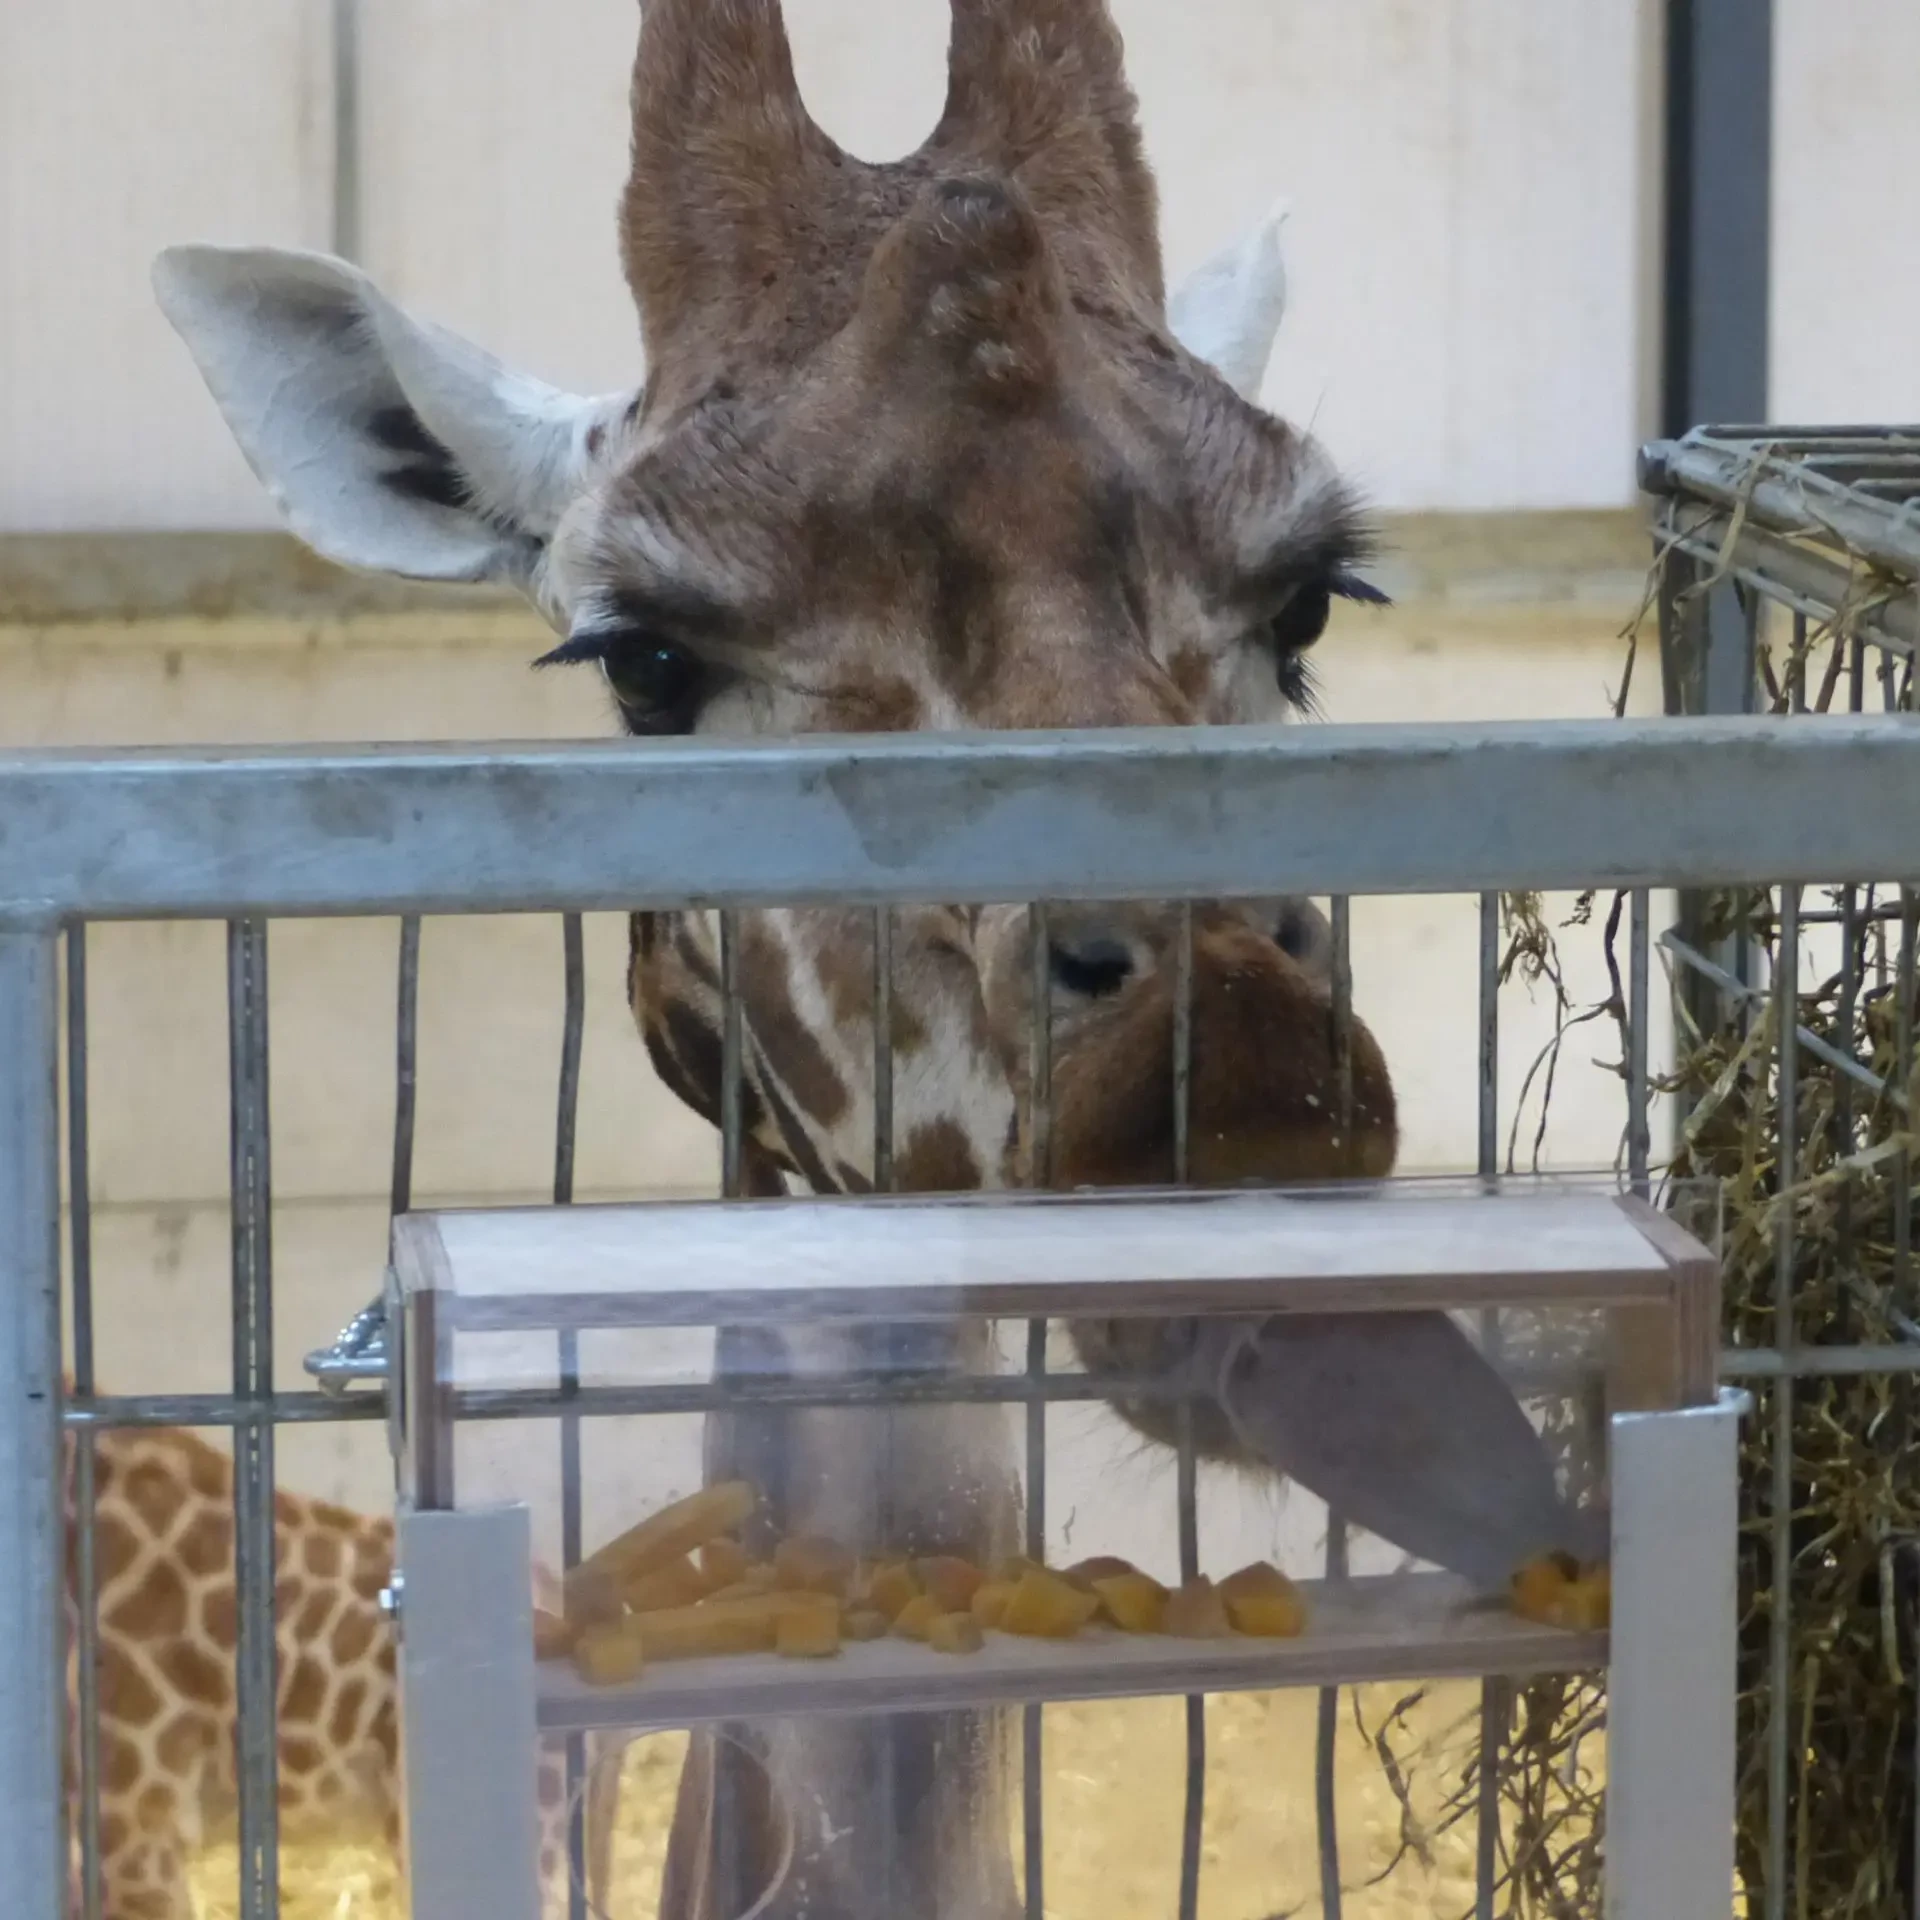 Giraffe eating from feeder built by people in charity team building event